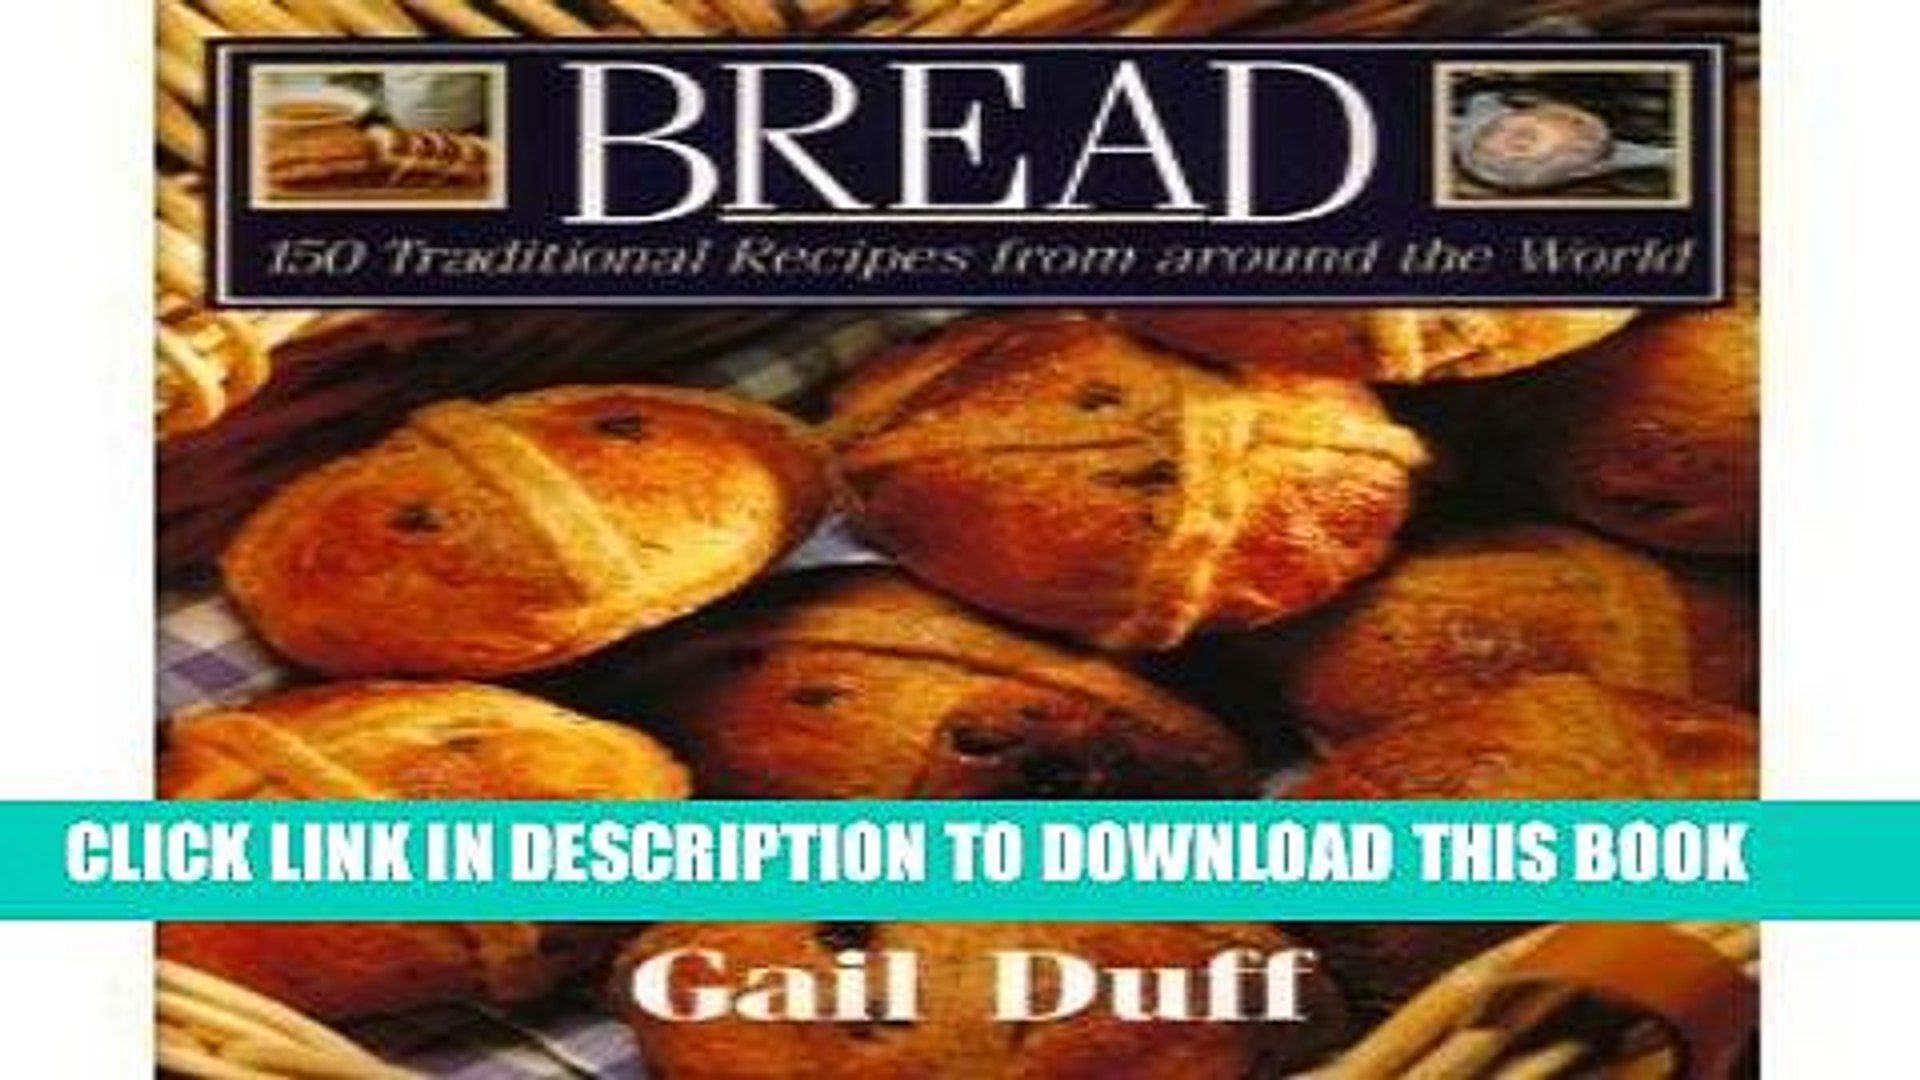 [PDF] Bread: 150 Traditional Recipes from Around the World Popular Collection